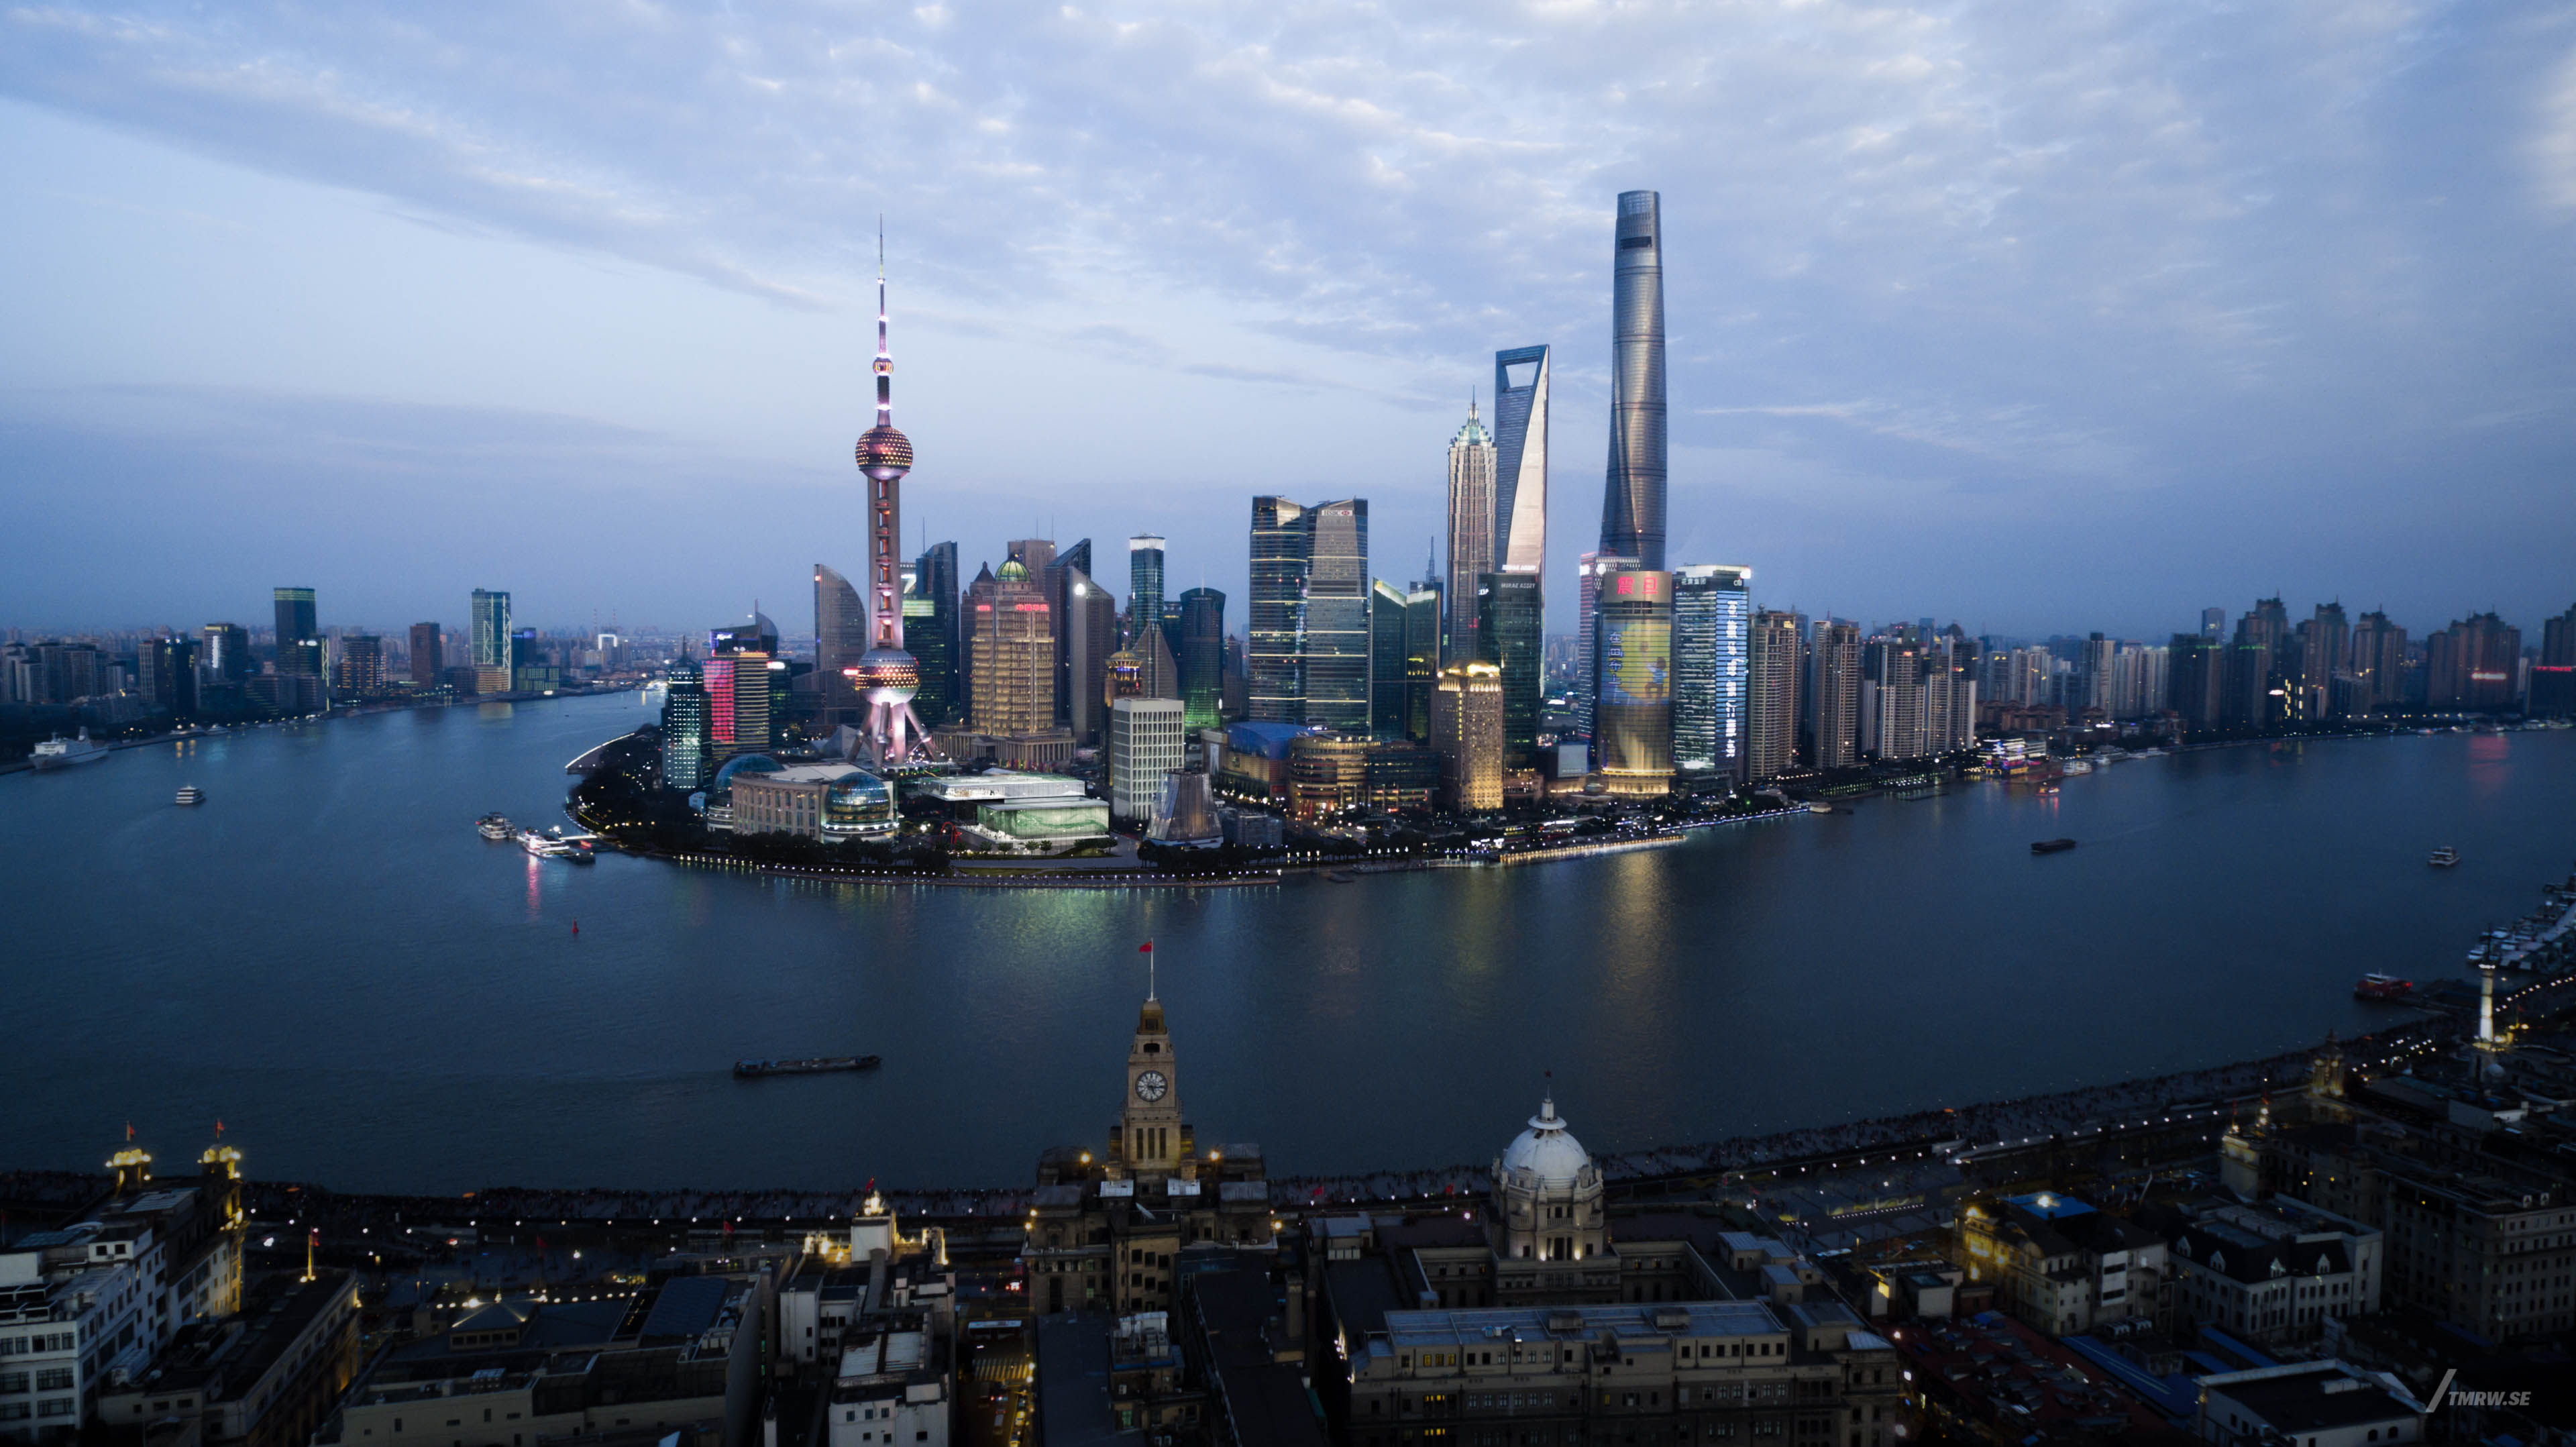 Architectural visualization of Shanghai for TJADRI in dusk light from an aerial view.